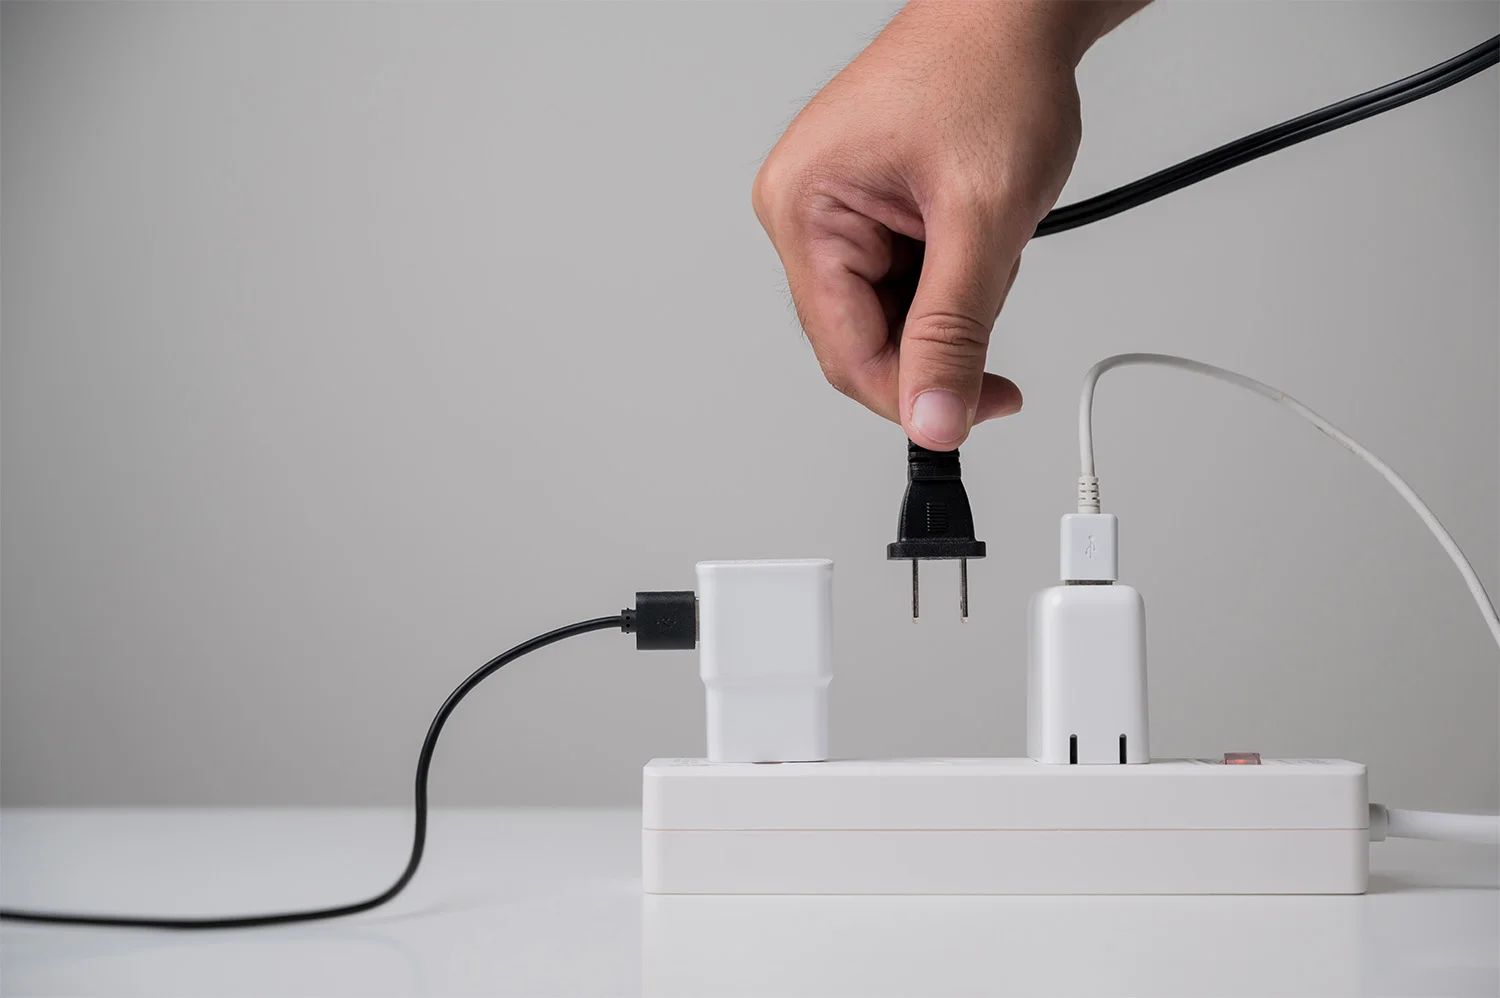 A person plugging a cord into an overloaded power strip which will lead to electrical overloads.